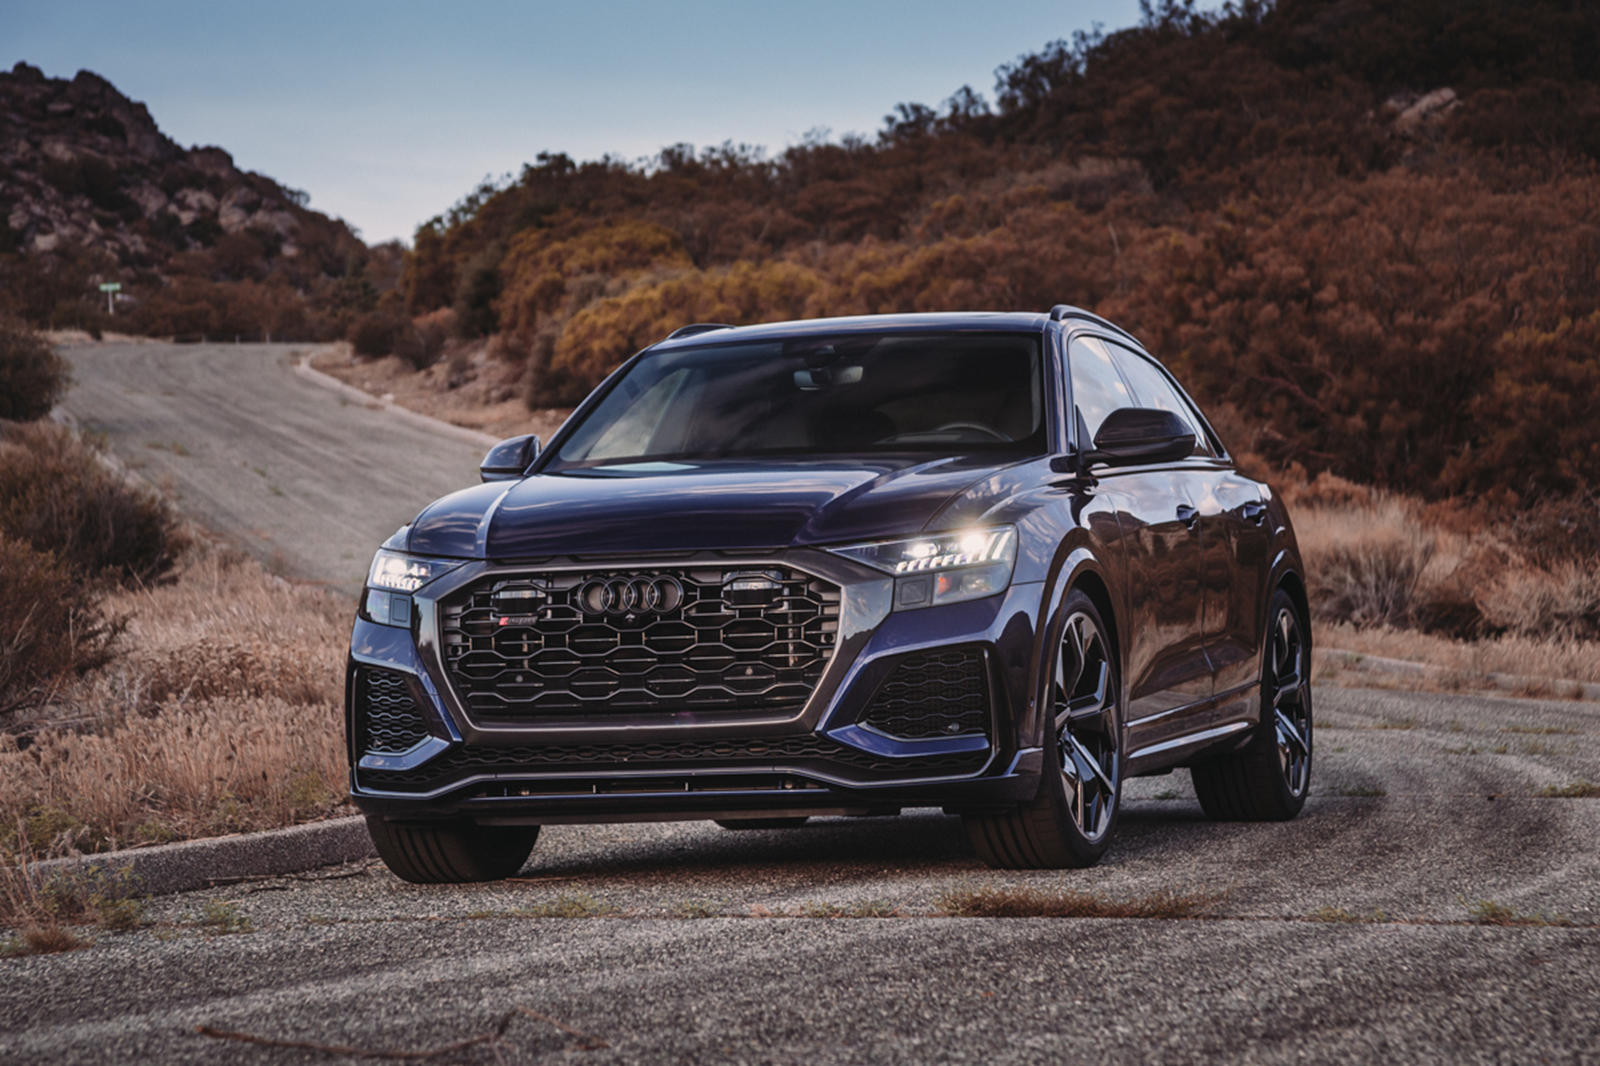 Know about the 2022 Audi RS Q8 in Detail